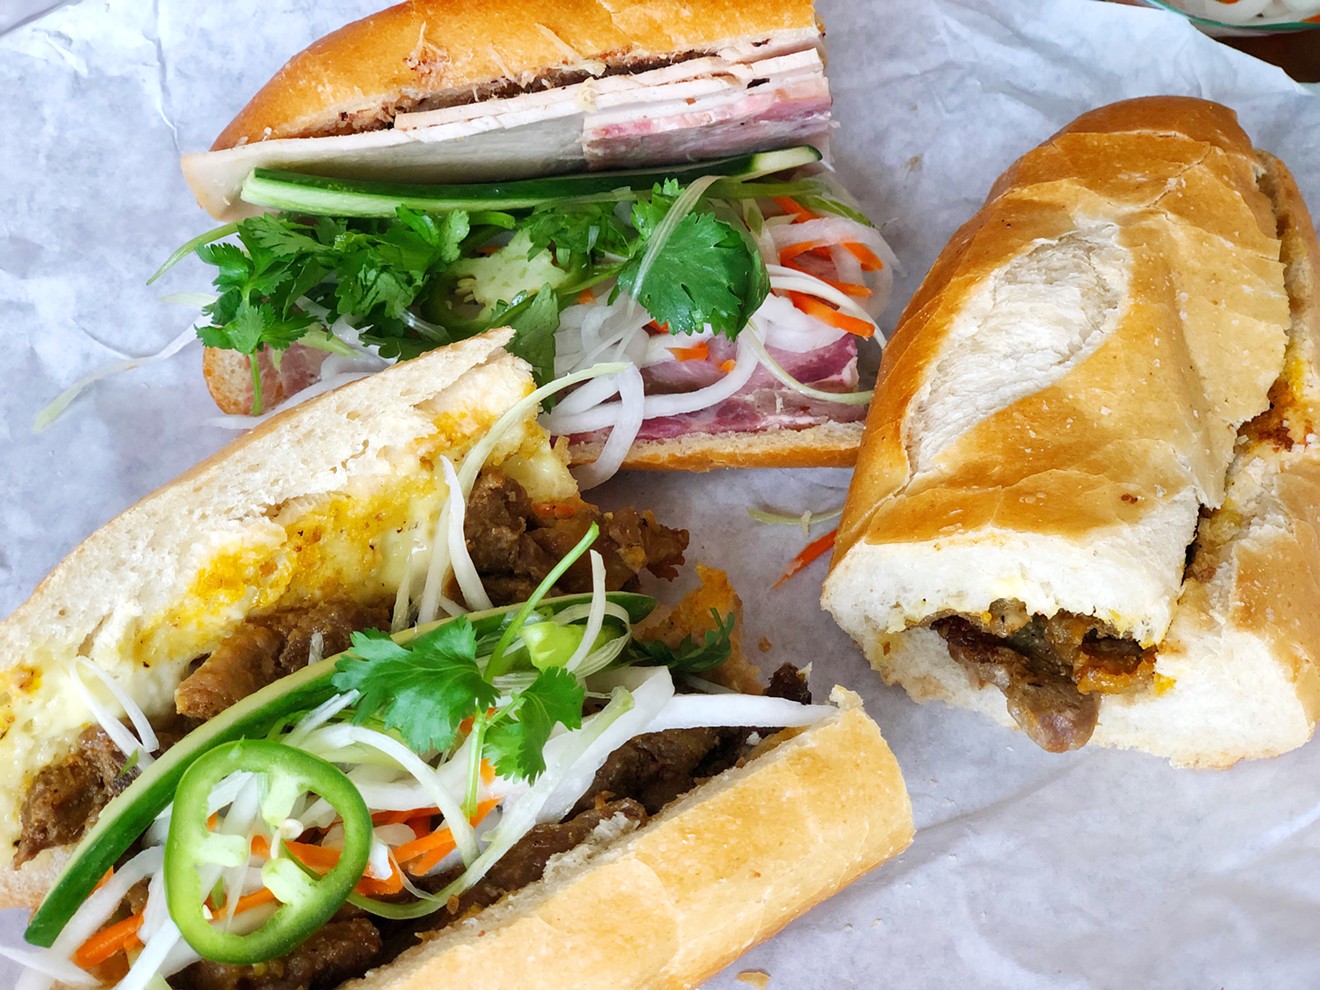 Urbanh Cafe's sandwich selection includes traditional picks like the "Dac Biet" Special and #B3 Grilled Pork, along with unique items like the #B4 Pork Belly.